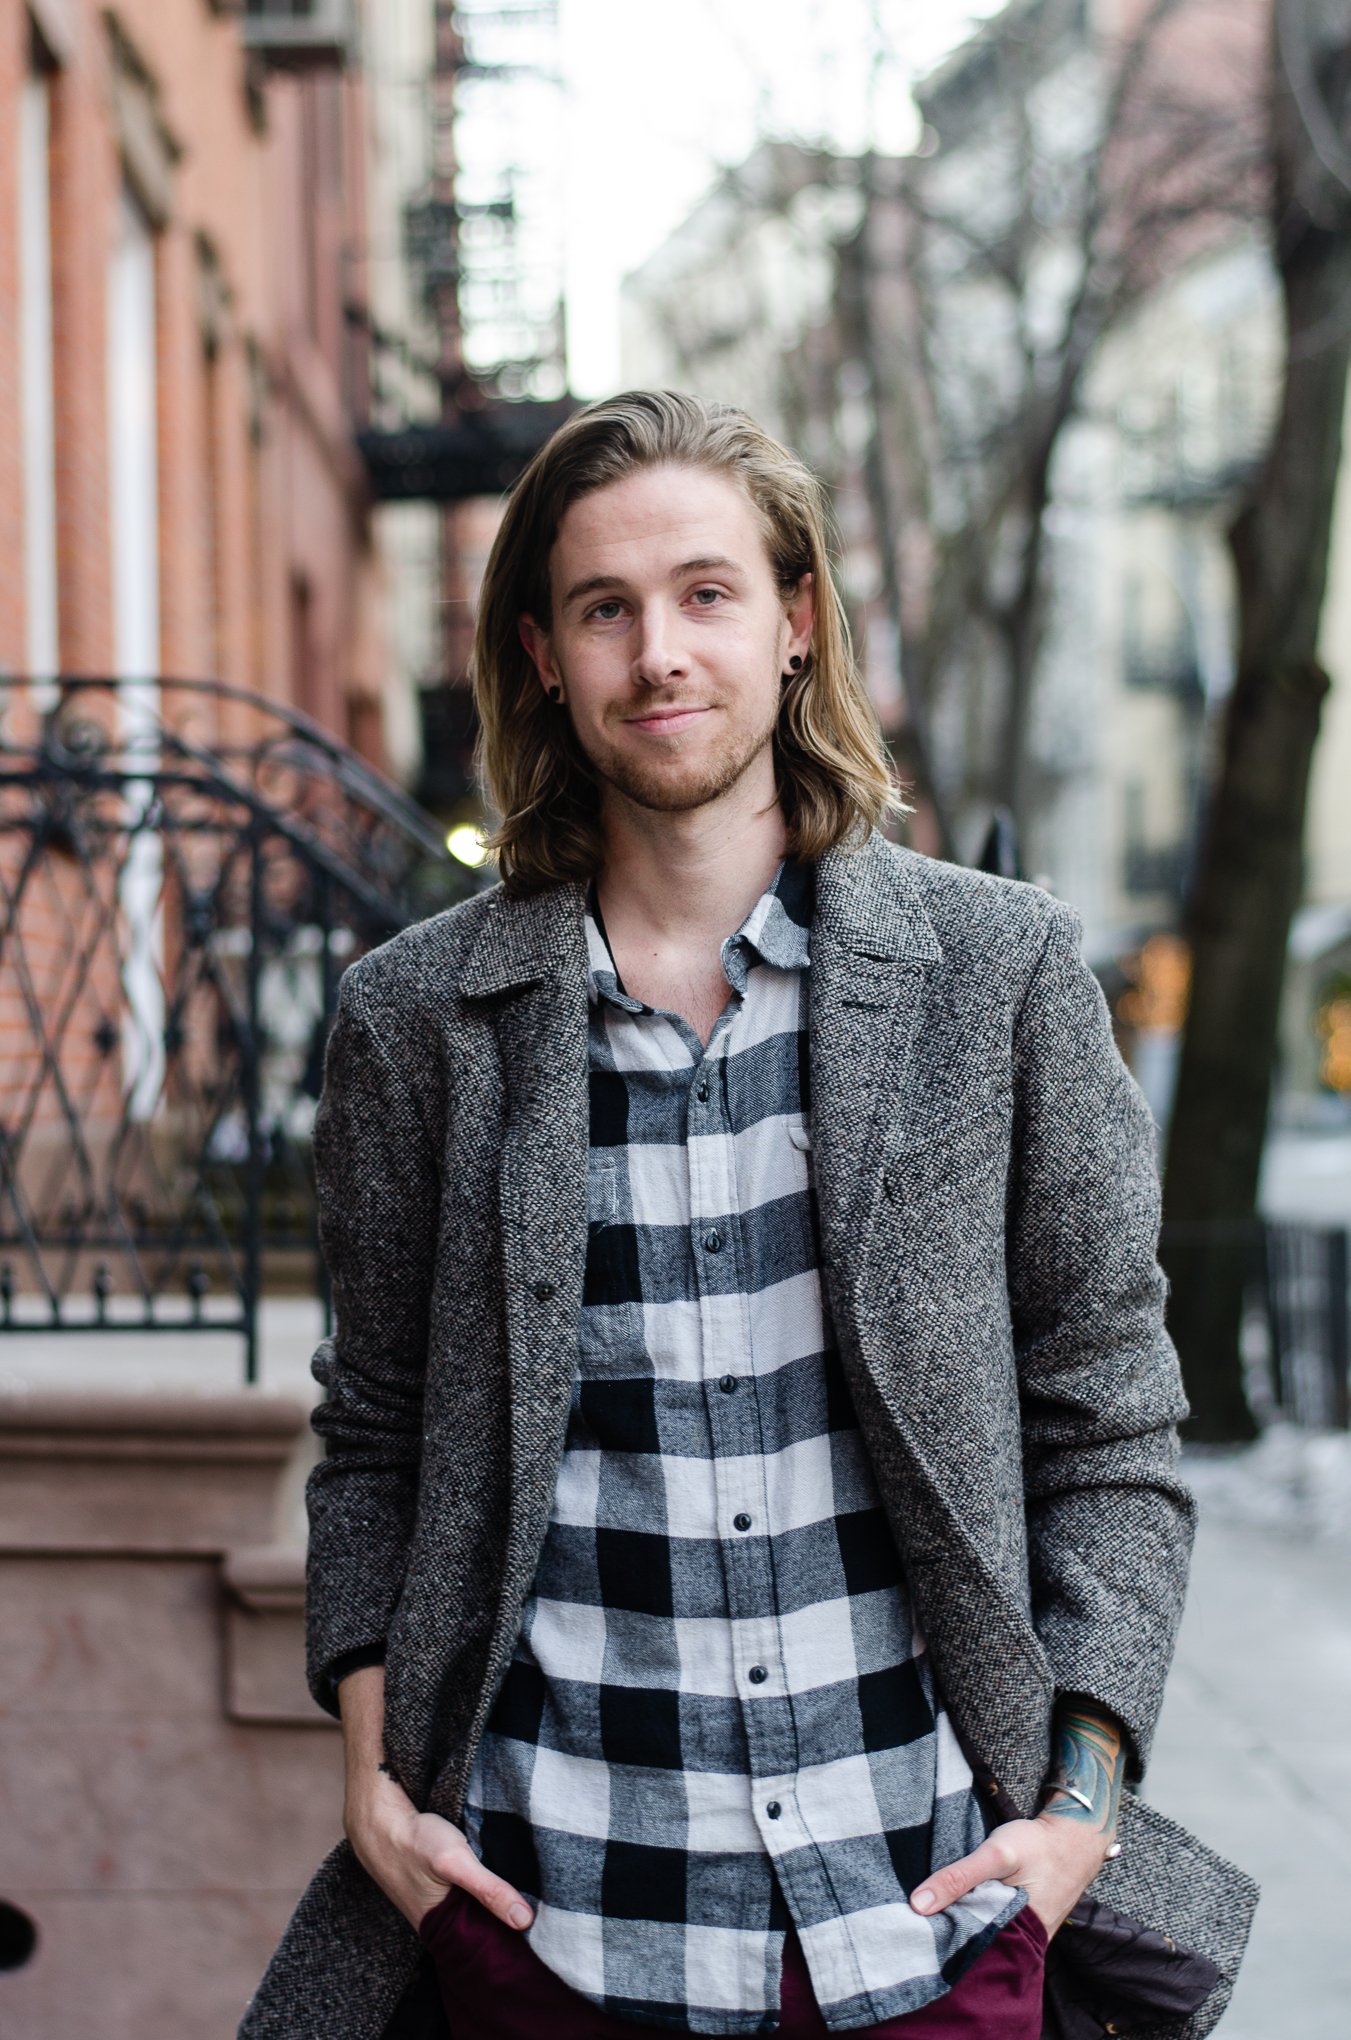 The Kentucky Gent, a men's fashion and lifestyle blogger, shares his NYMD journeys during NYFW.